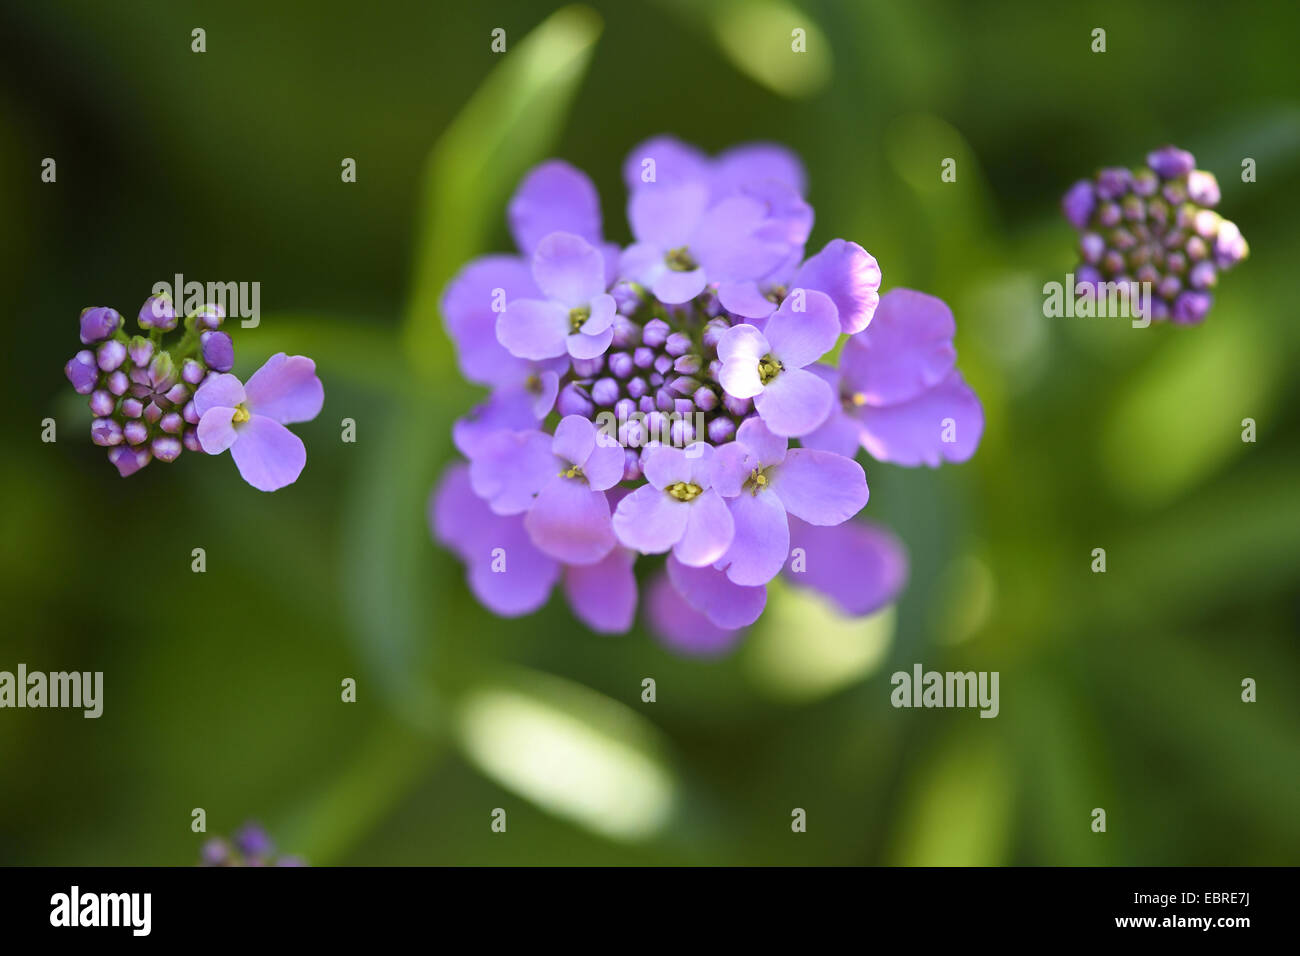 globe candytuft, umbellate candytuft, common candy-tuft (Iberis umbellata), blooming Stock Photo